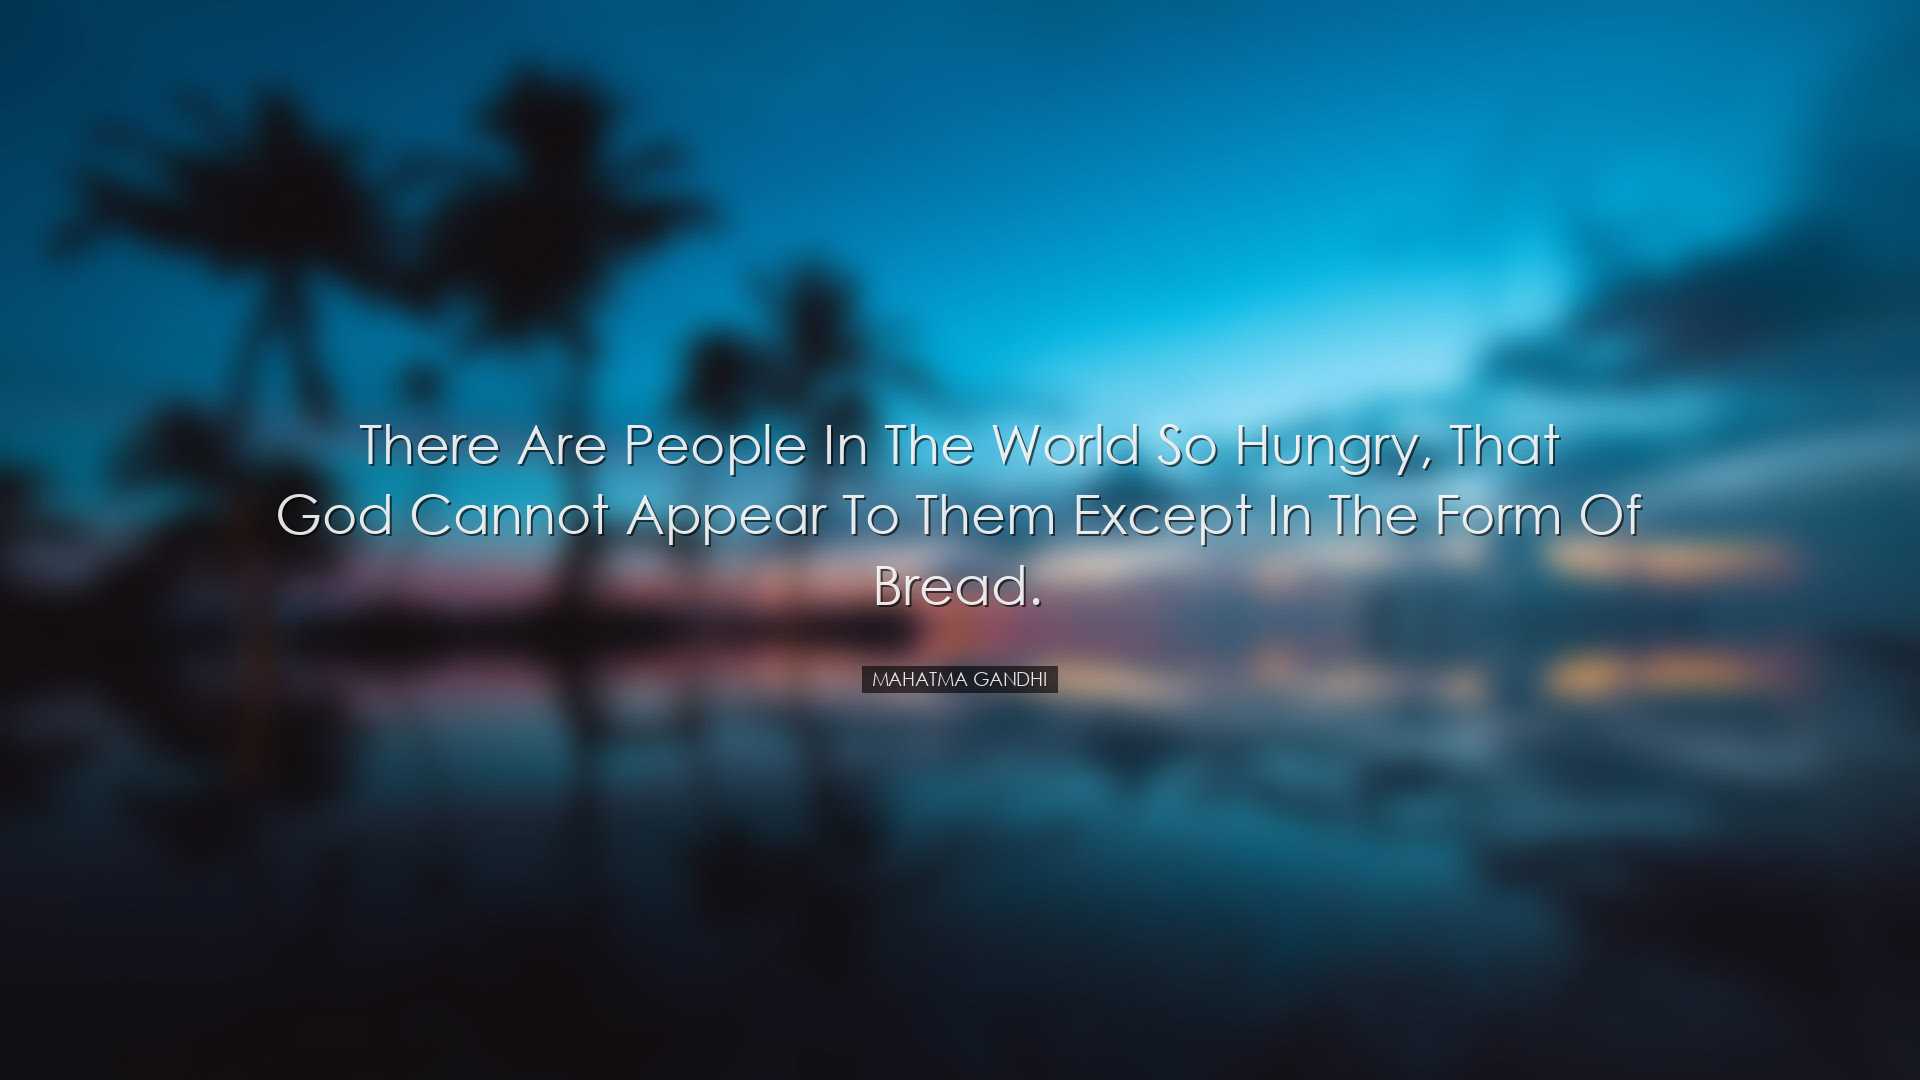 There are people in the world so hungry, that God cannot appear to